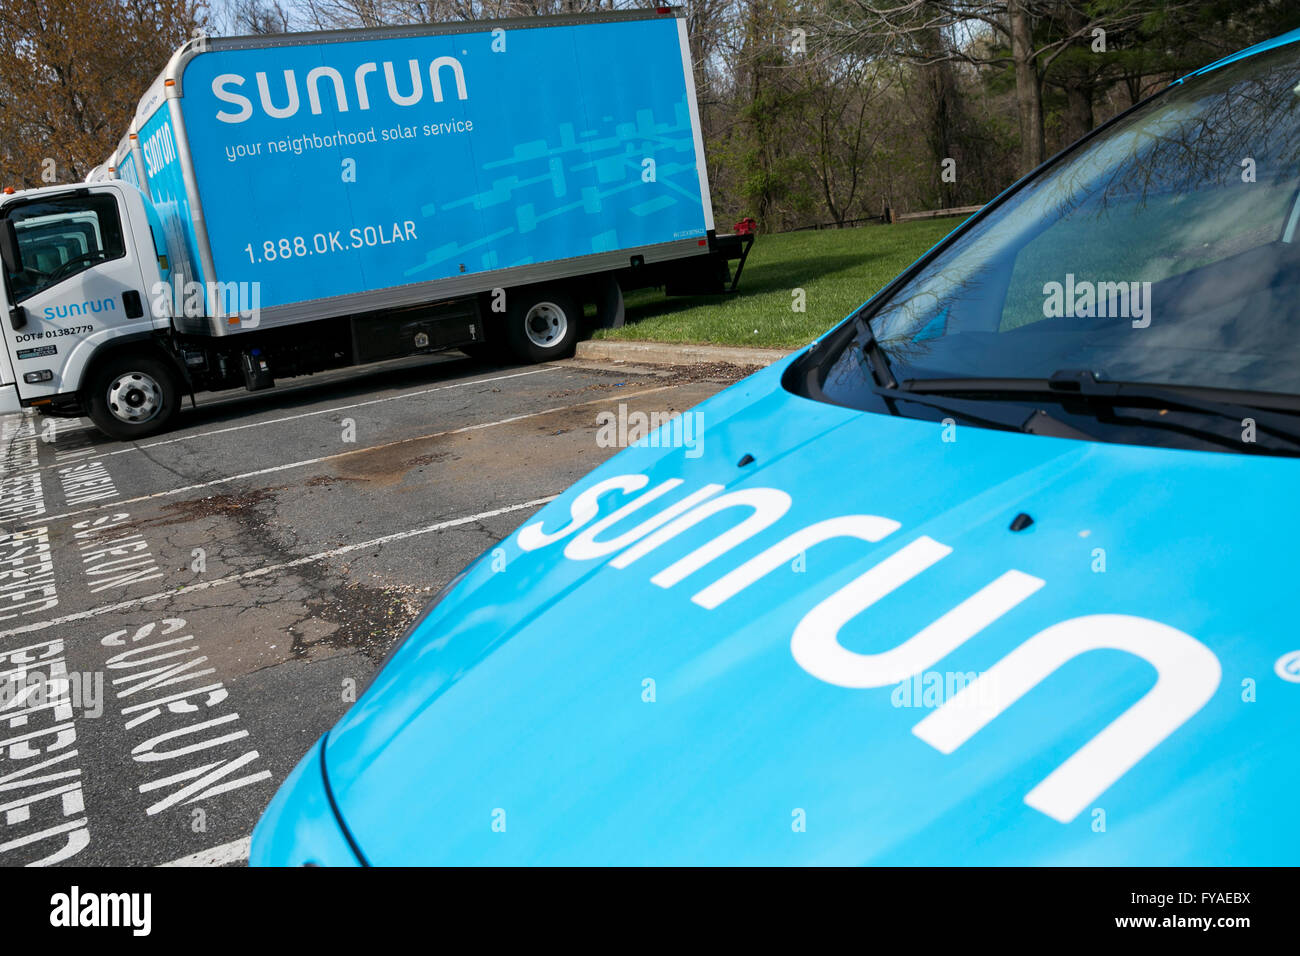 Work vans featuring logos of solar provider Sunrun Inc., in Linthicum Heights, Maryland on April 10, 2016 Stock Photo Alamy